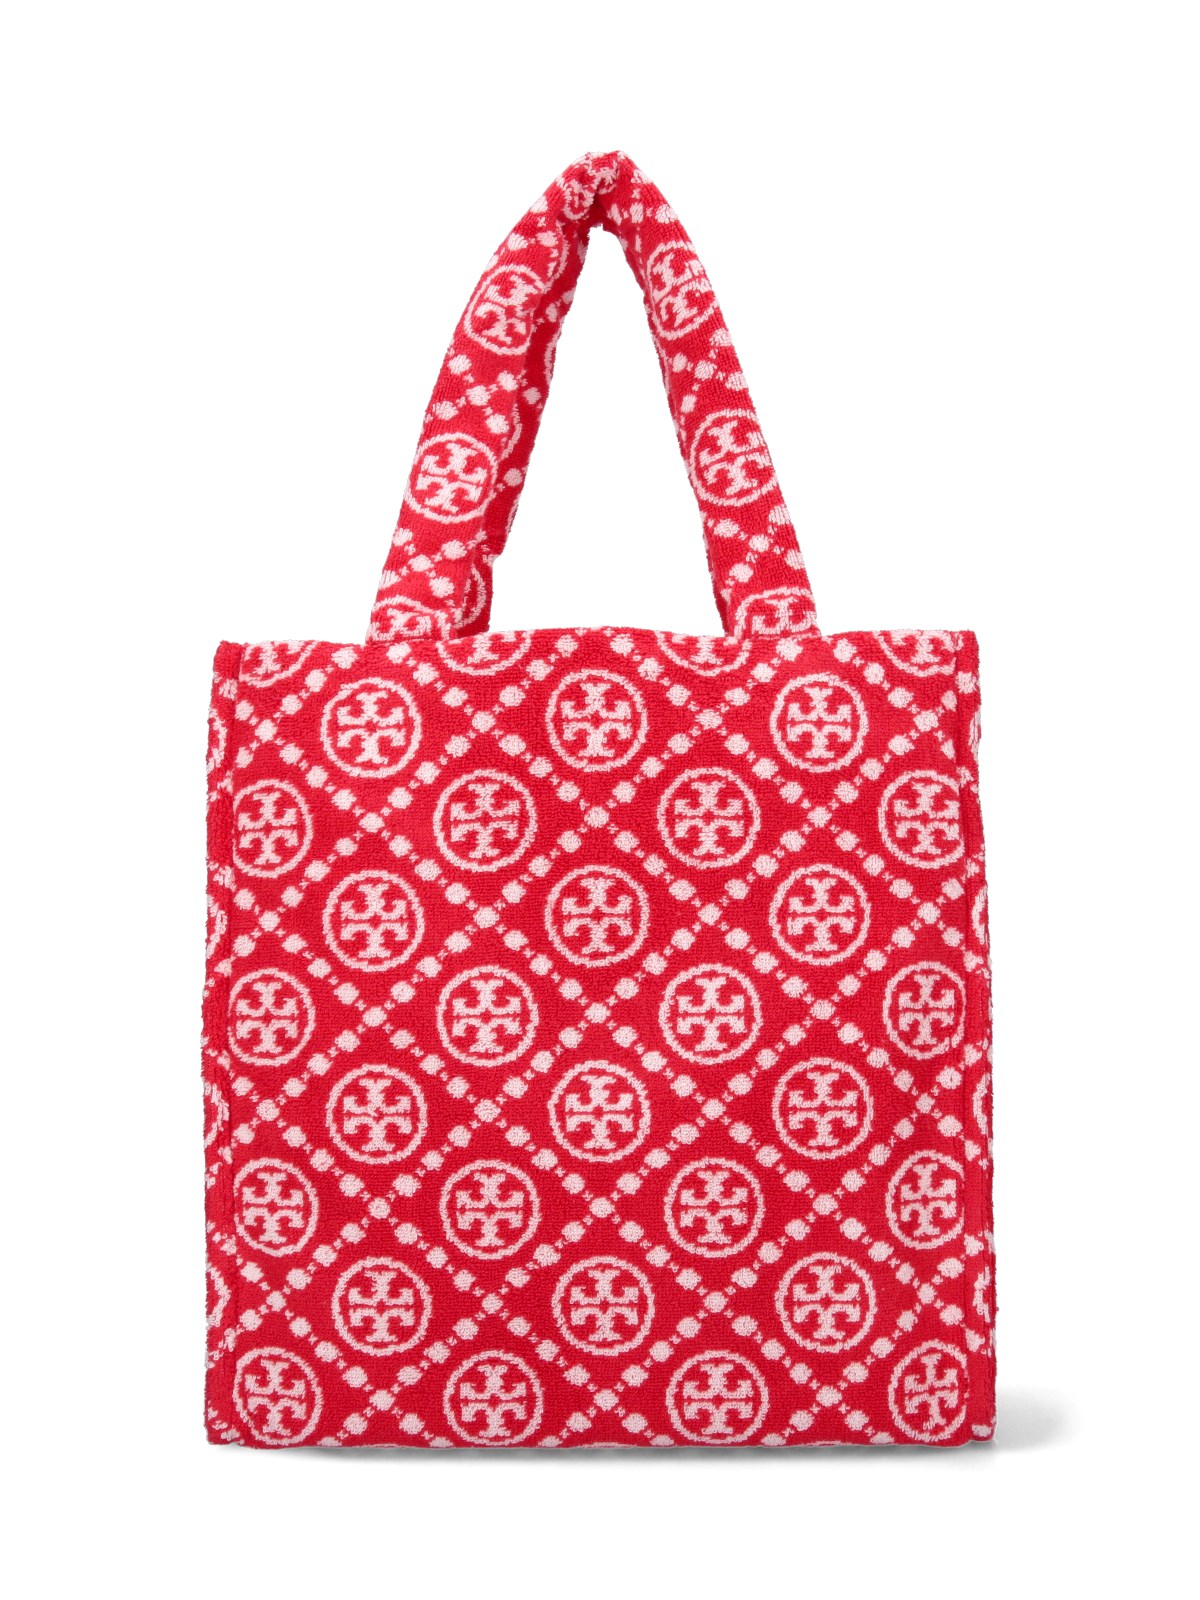 Tory Burch "t-monogram" Terry Tote Bag In Red